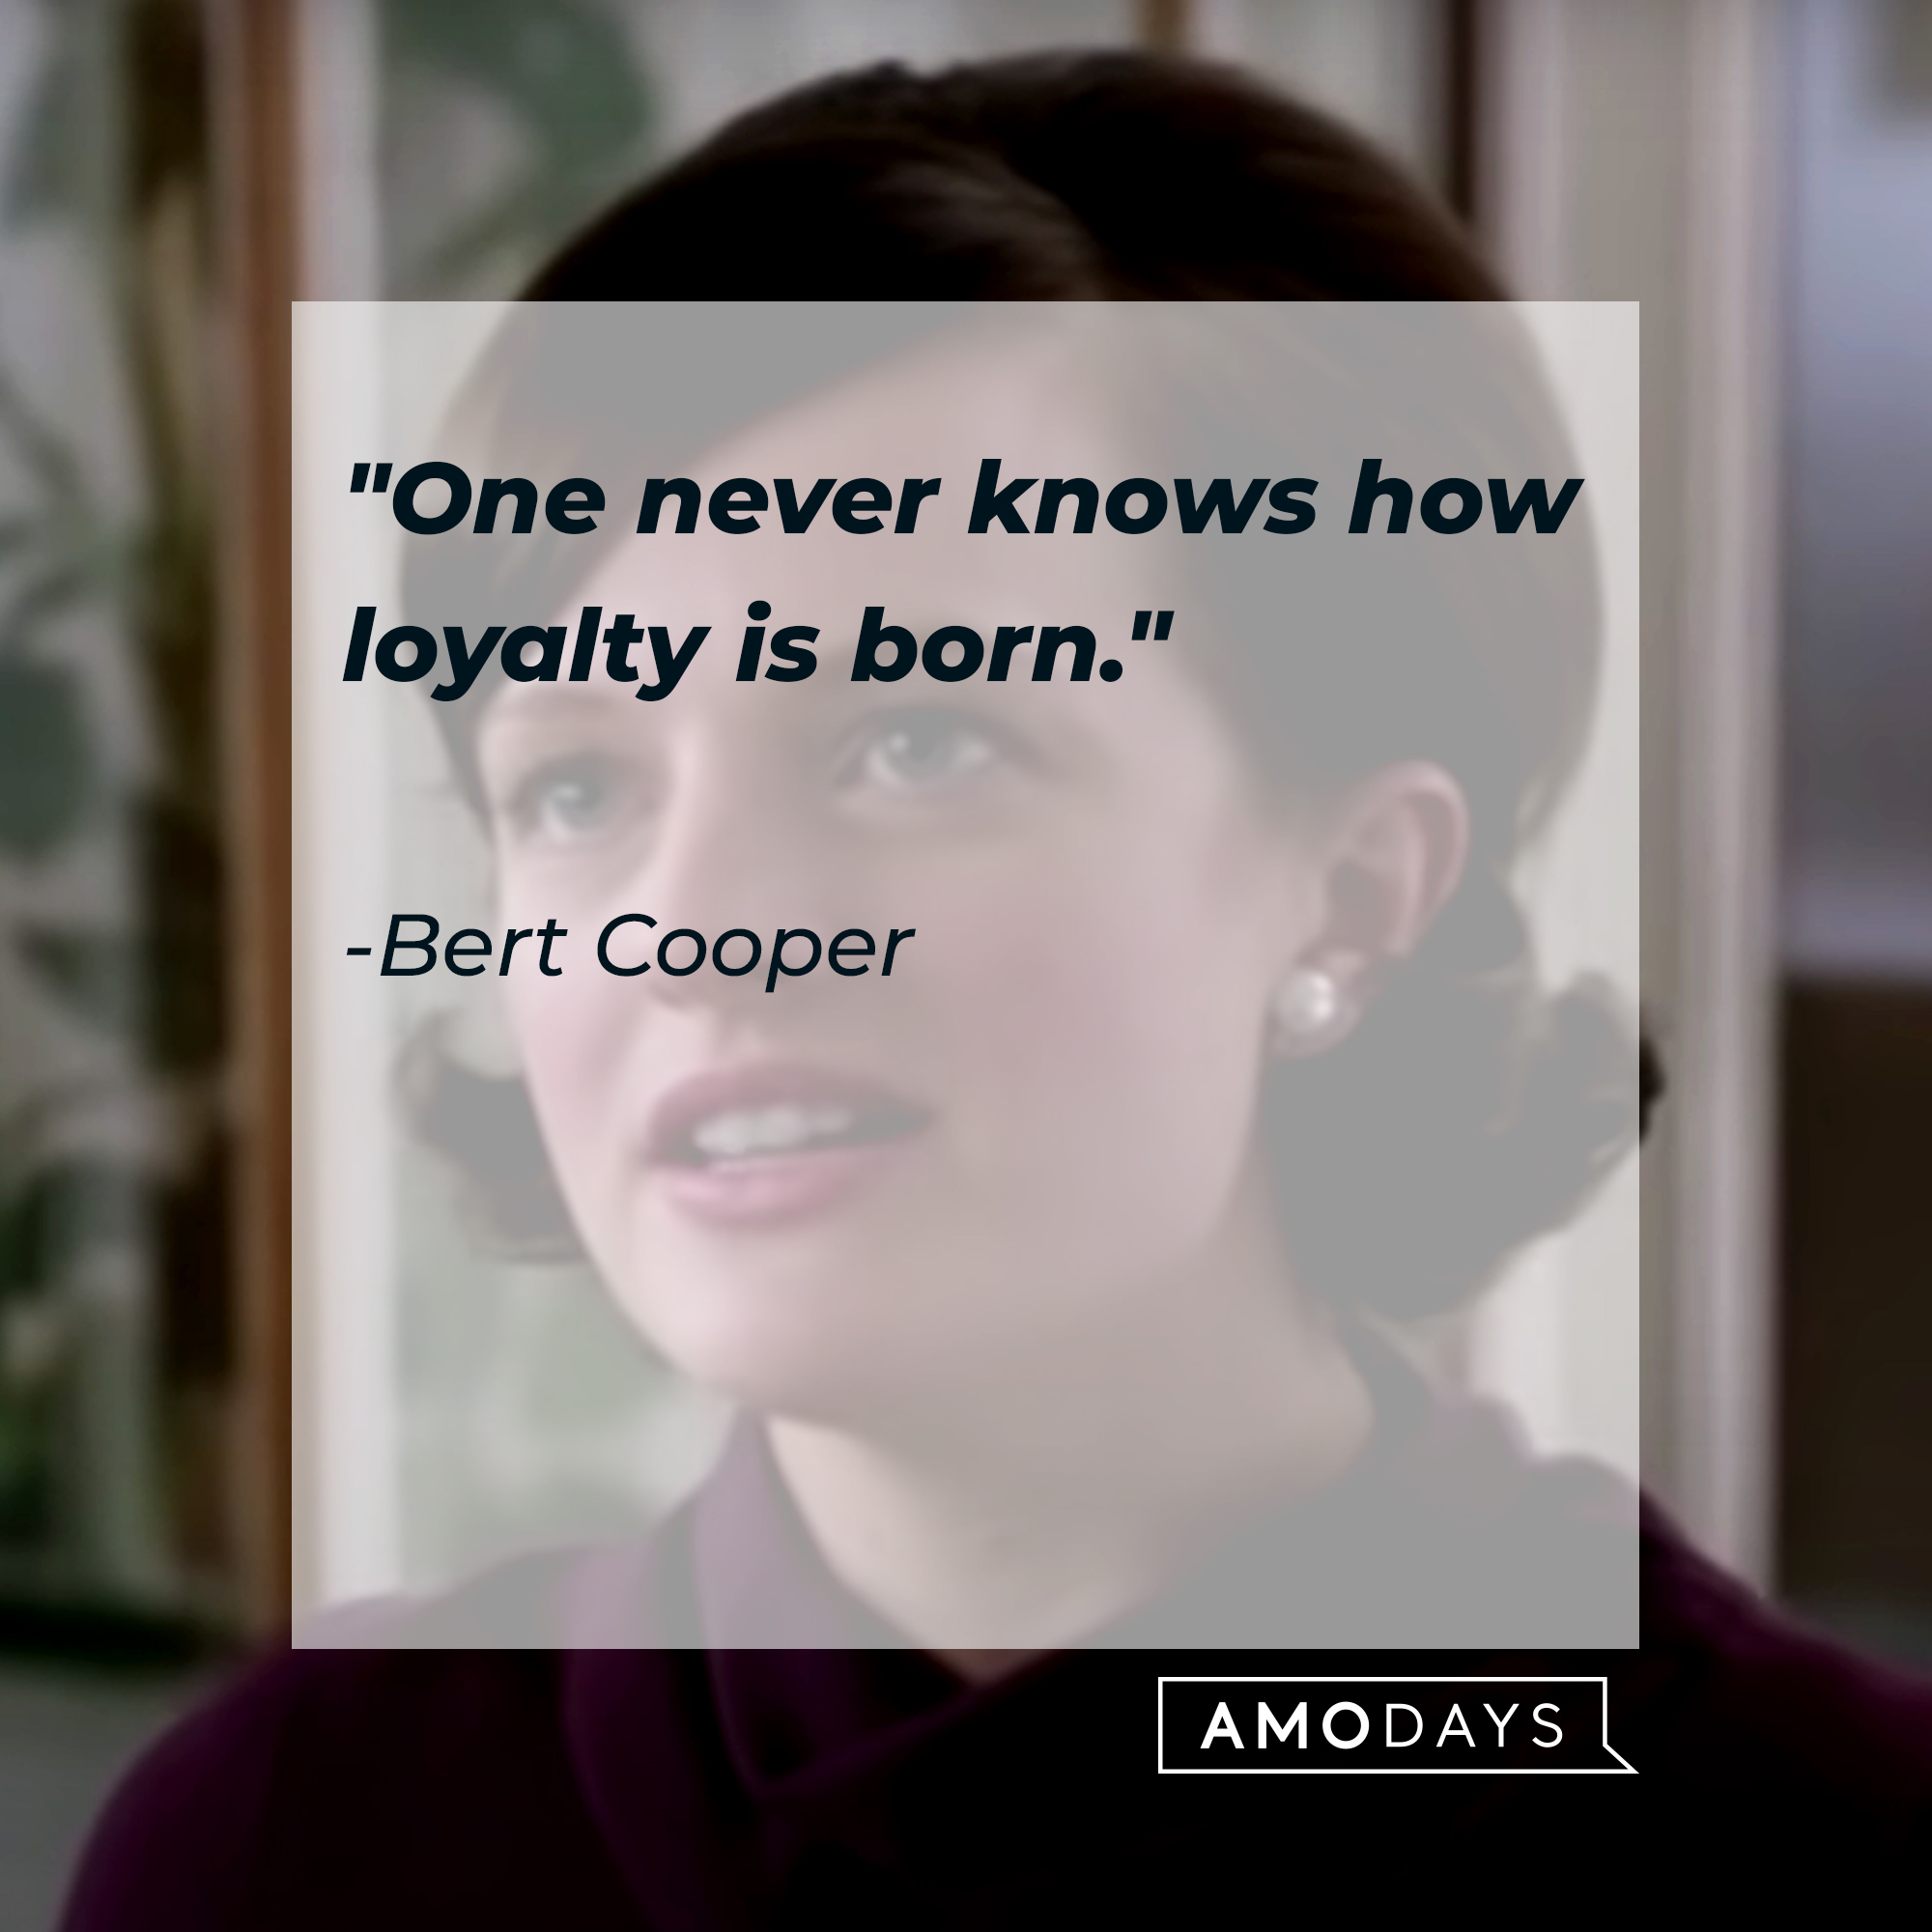 Bert Cooper's quote: "One never knows how loyalty is born." | Source: Facebook.com/MadMen